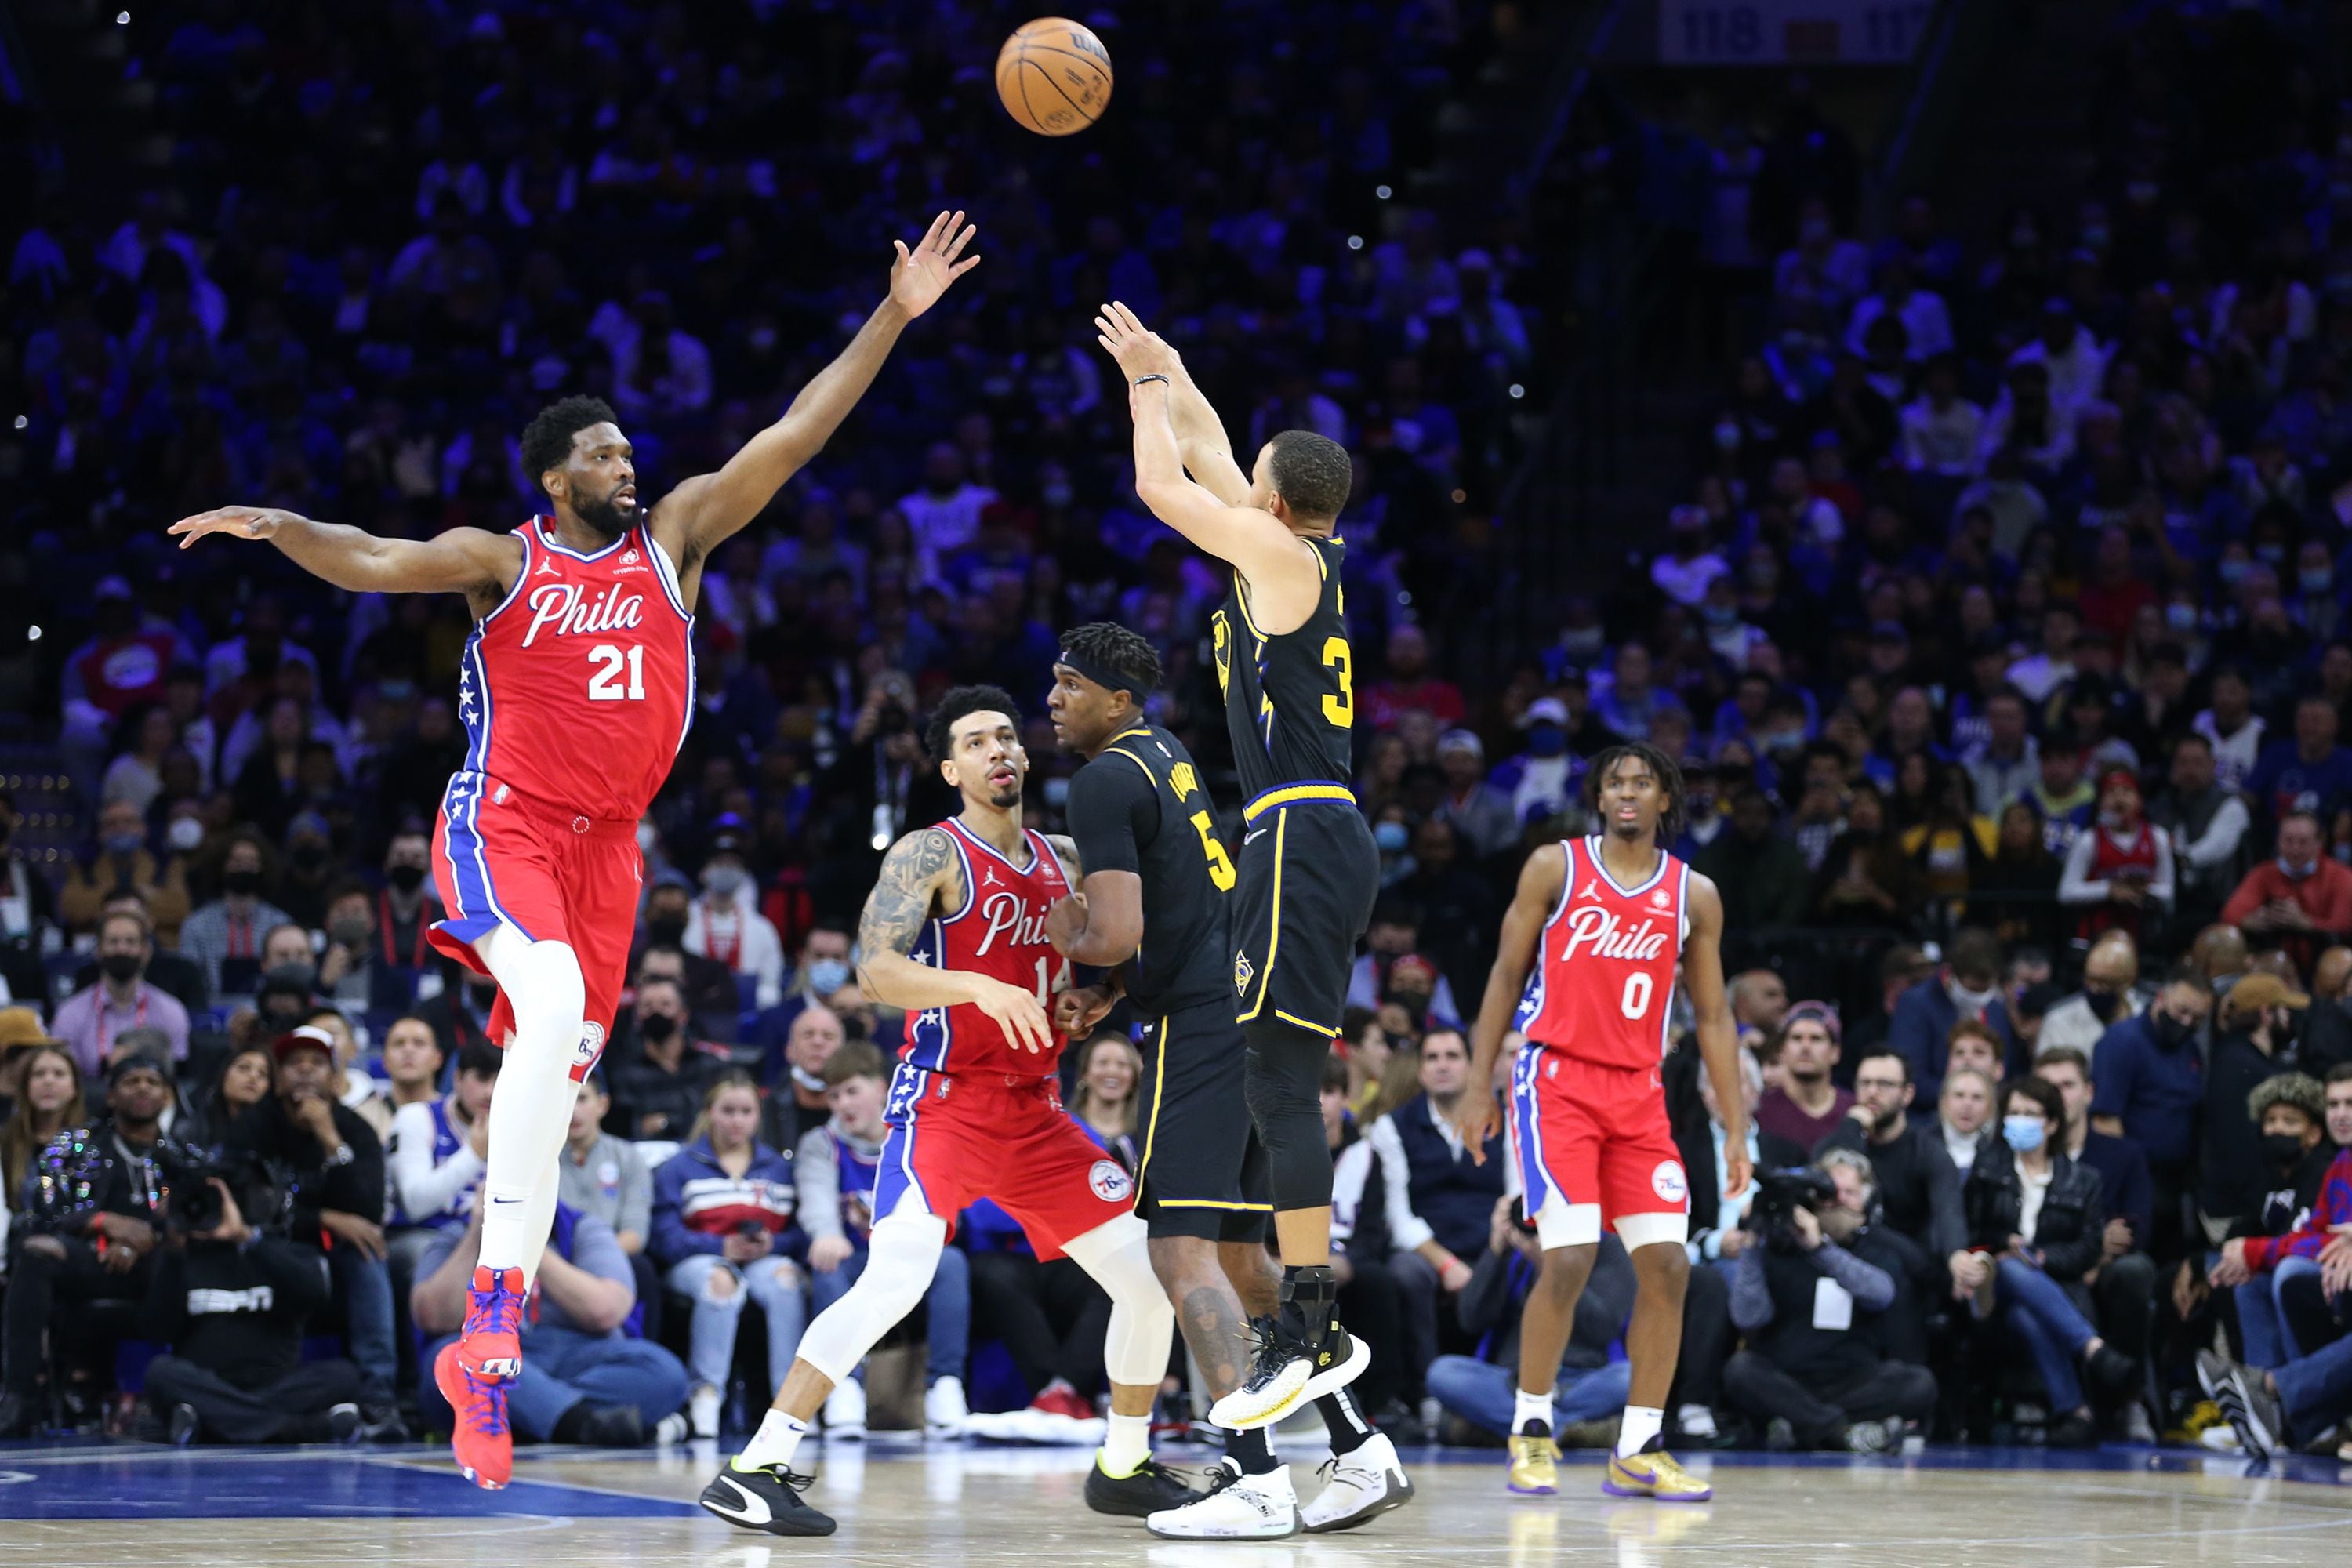 Sixers, Thybulle make sure Steph Curry has no shot at three-point